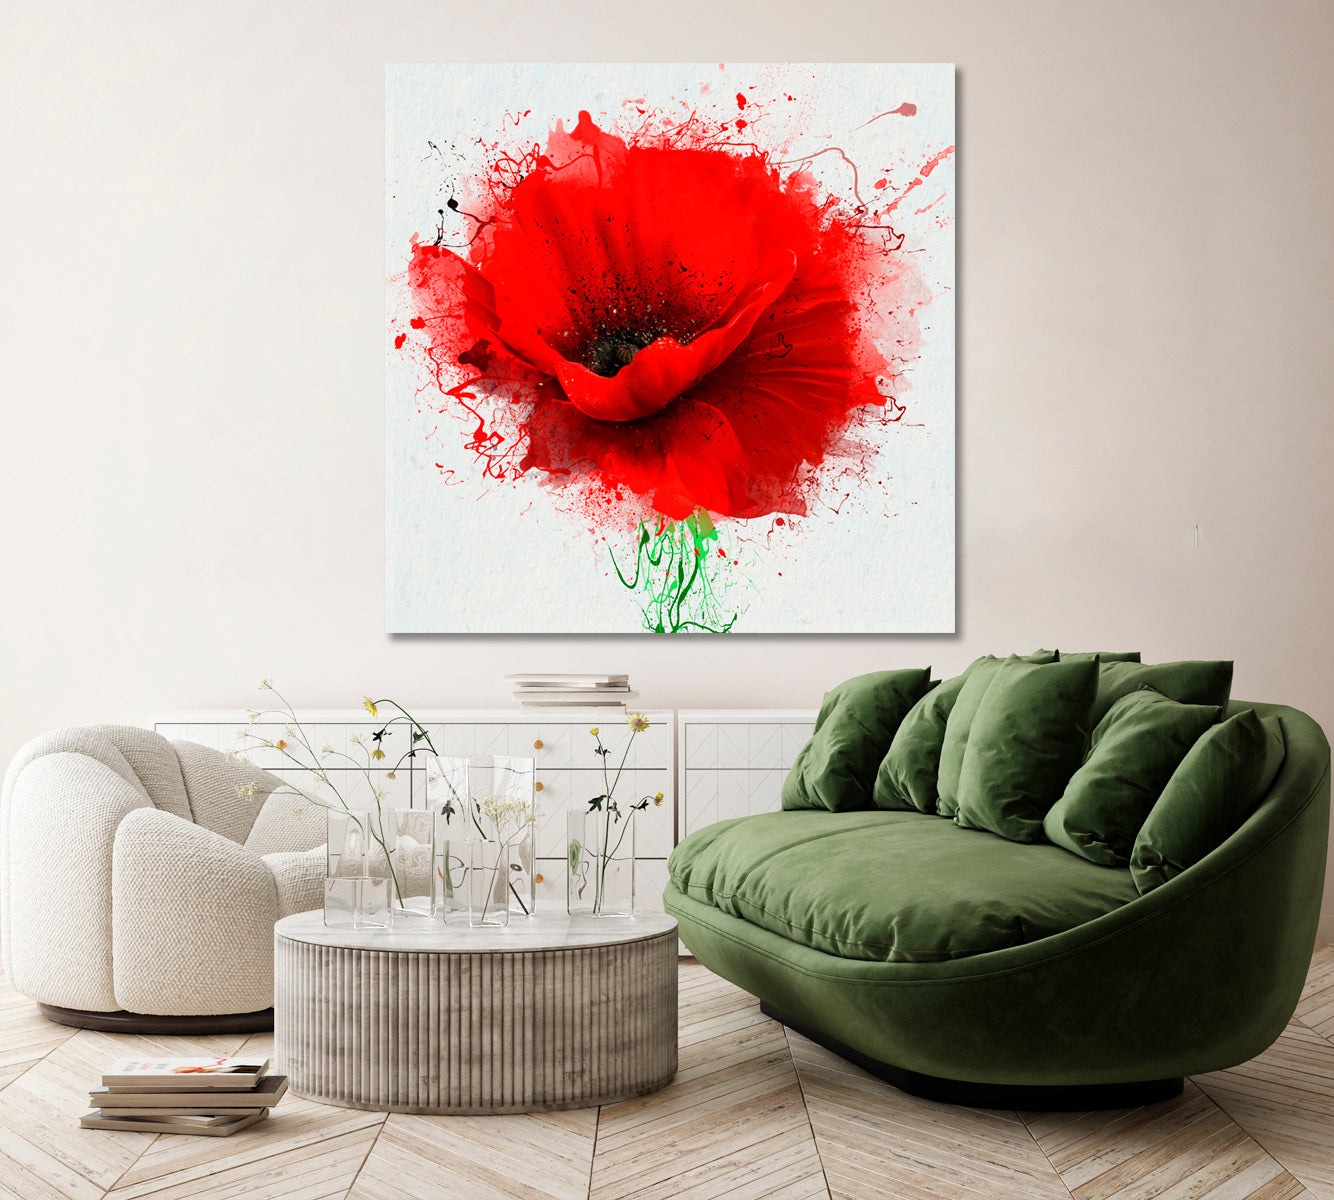 Beautiful Abstract Red Poppy Canvas Print ArtLexy 1 Panel 12"x12" inches 